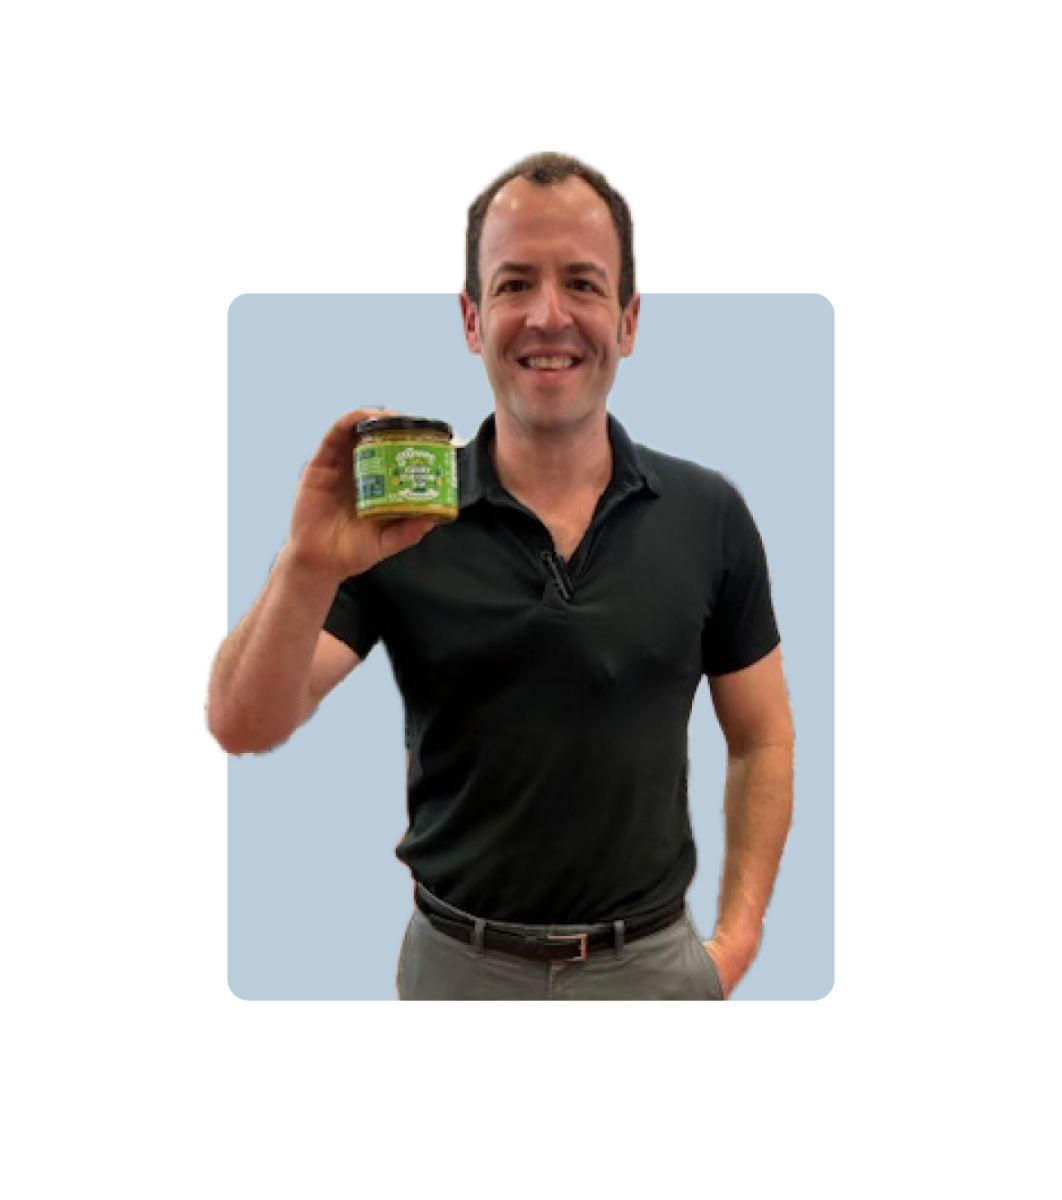 Dougy holding curry zucchini dip in Shubie's february pick of the month photo